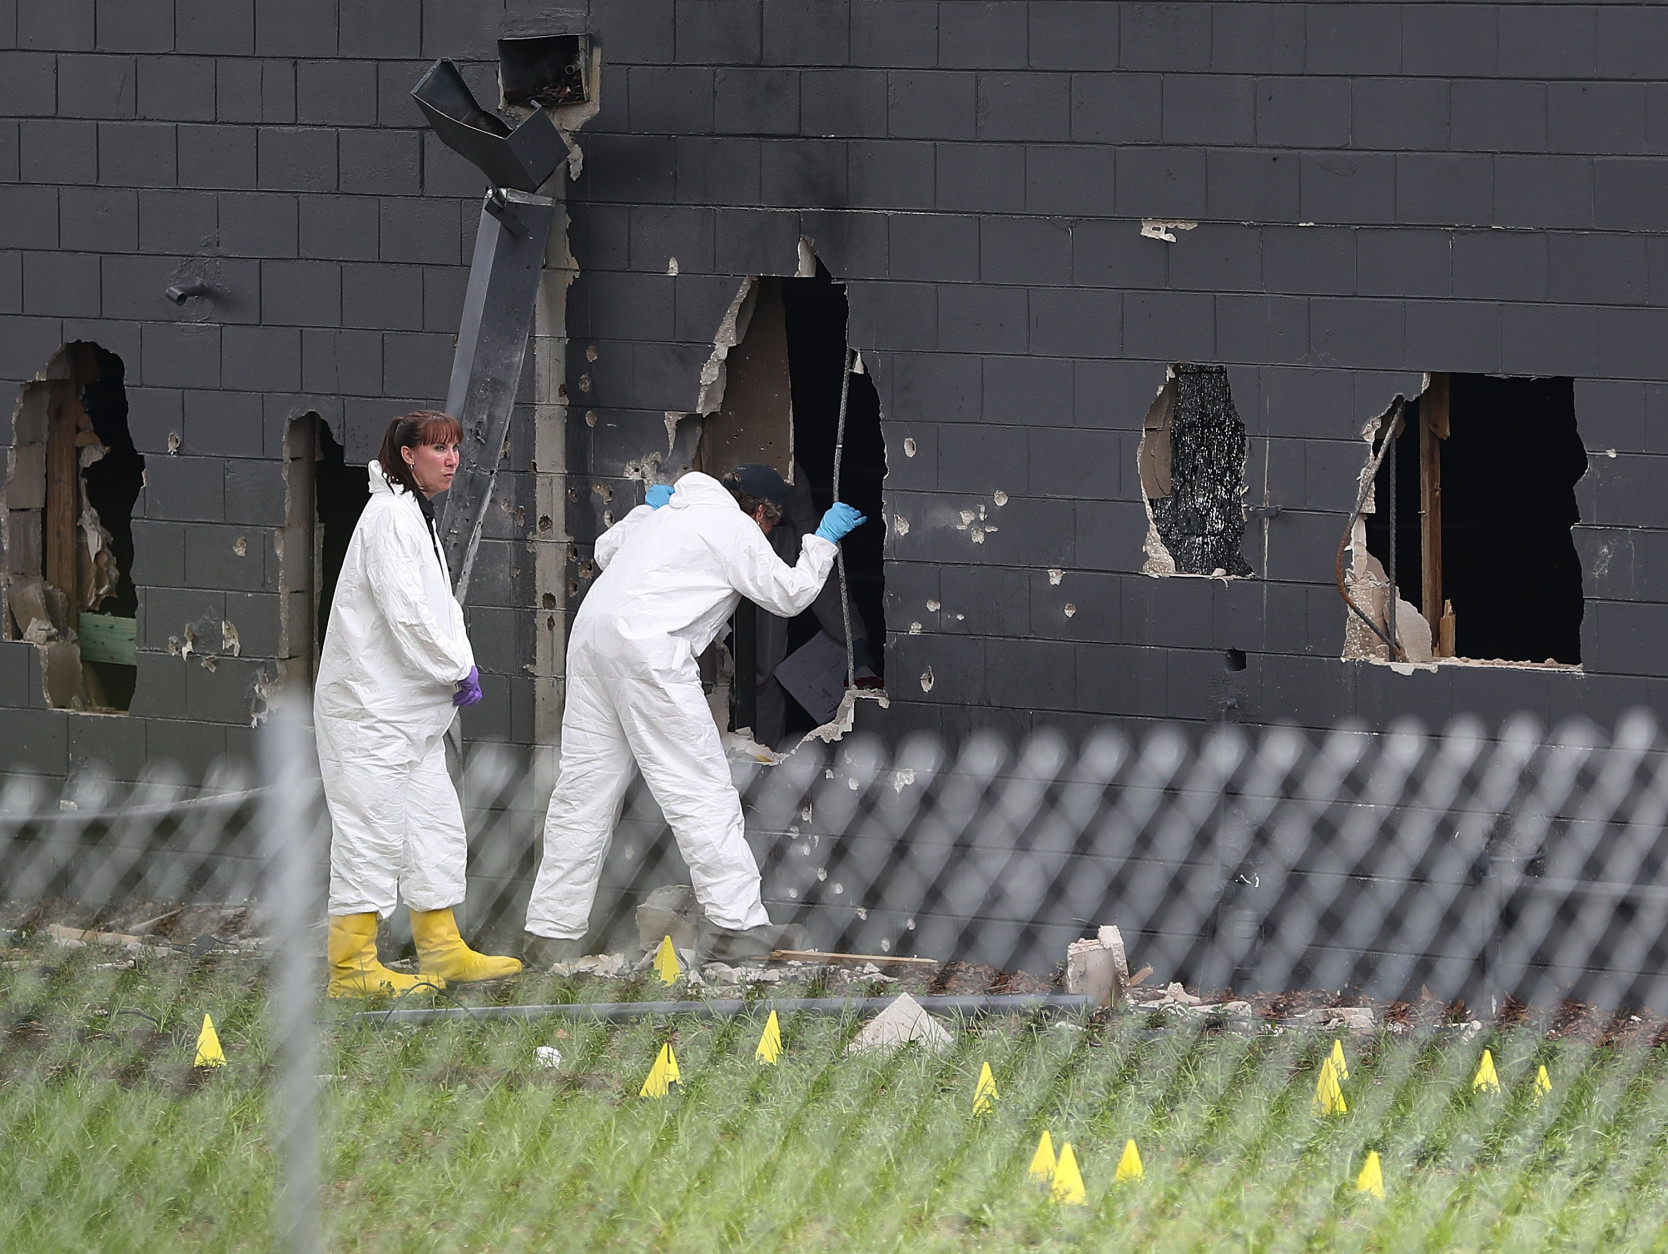 ORLANDO, FL - JUNE 12:  FBI agents investigate near the damaged rear wall of the Pulse Nightclub where Omar Mateen allegedly killed at least 50 people on June 12, 2016 in Orlando, Florida. The mass shooting killed at least 50 people and injuring 53 others in what is the deadliest mass shooting in the country's history.  (Photo by Joe Raedle/Getty Images)